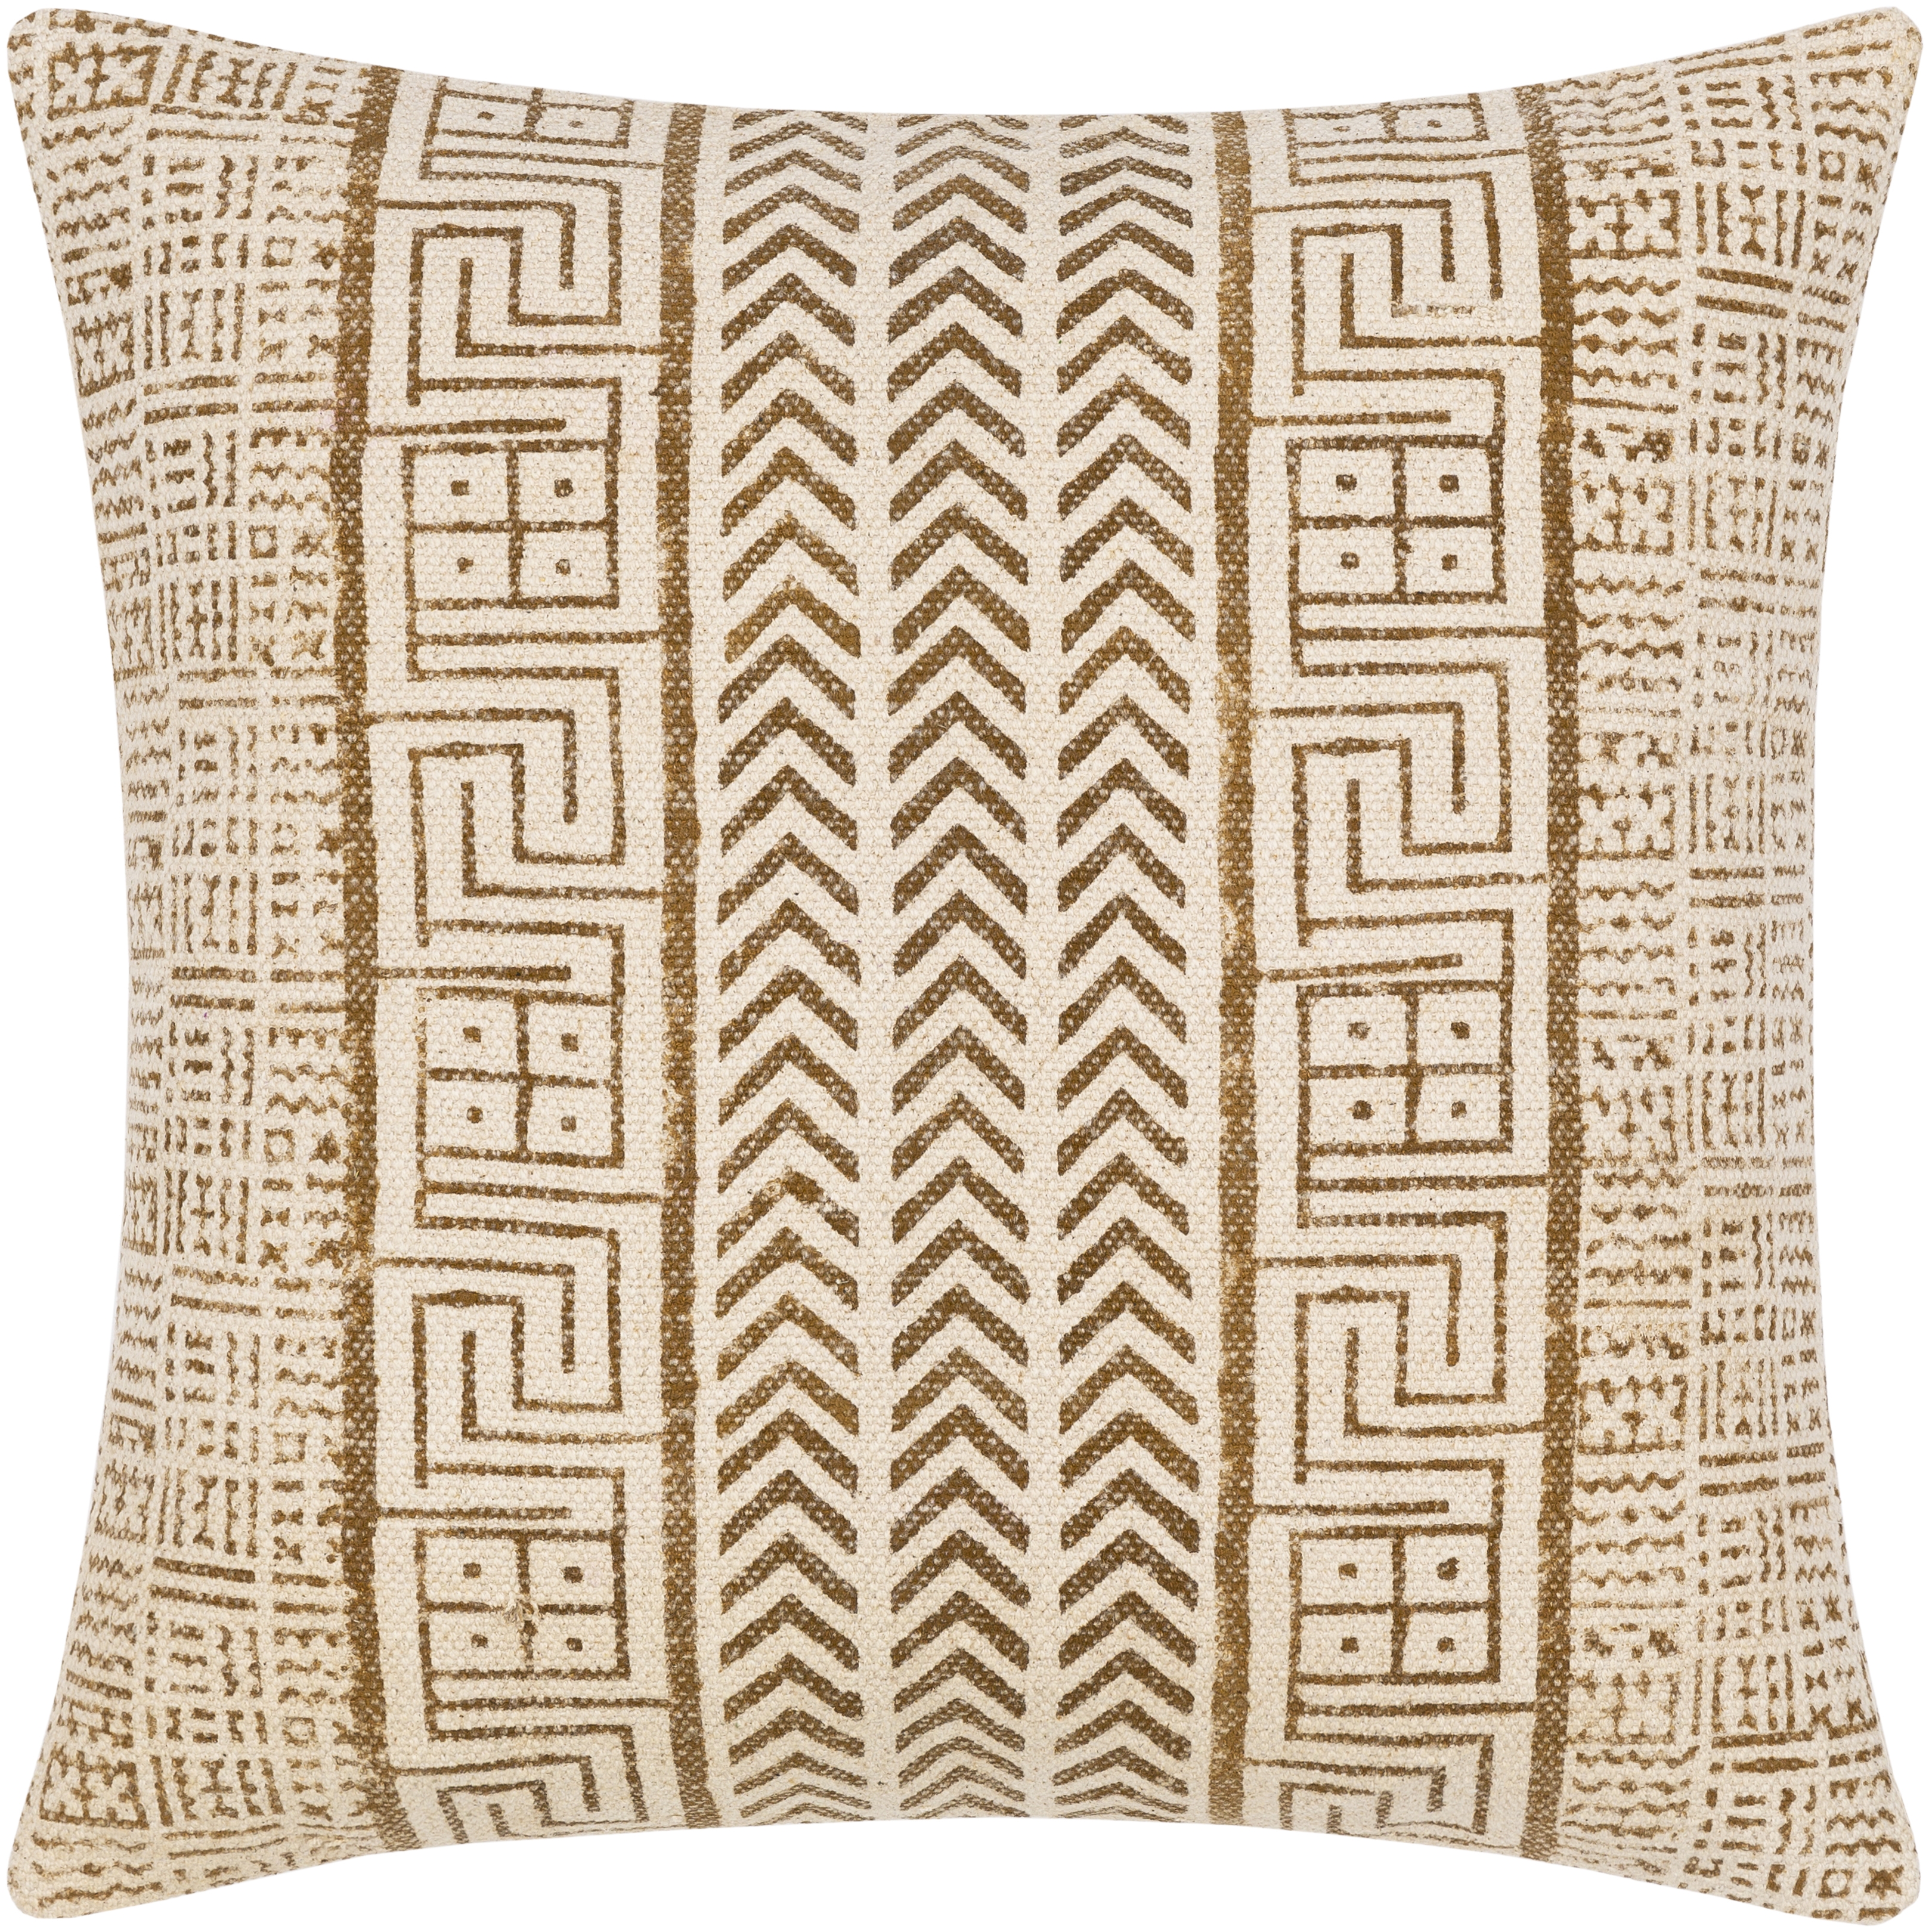 Janya Throw Pillow, 20" x 20", pillow cover only - Image 0